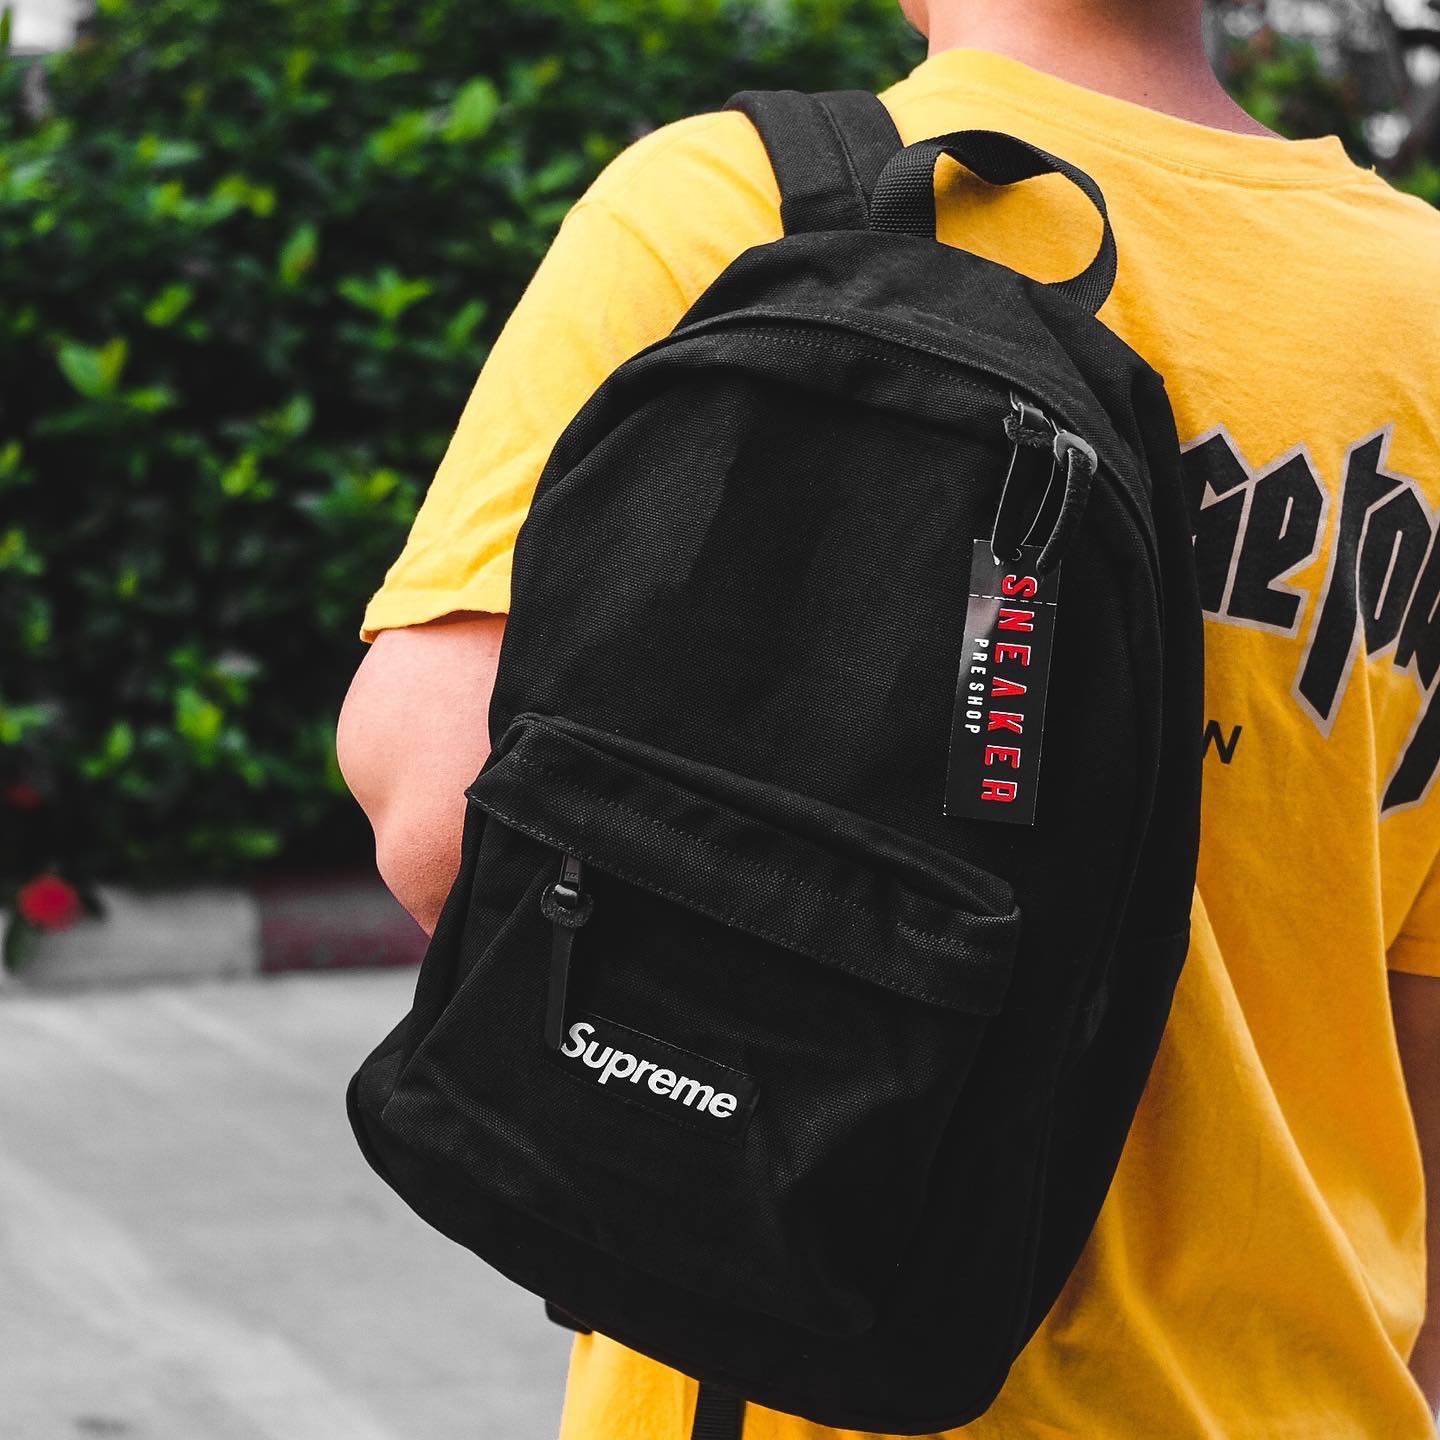 Top 10 supreme backpack ideas and inspiration